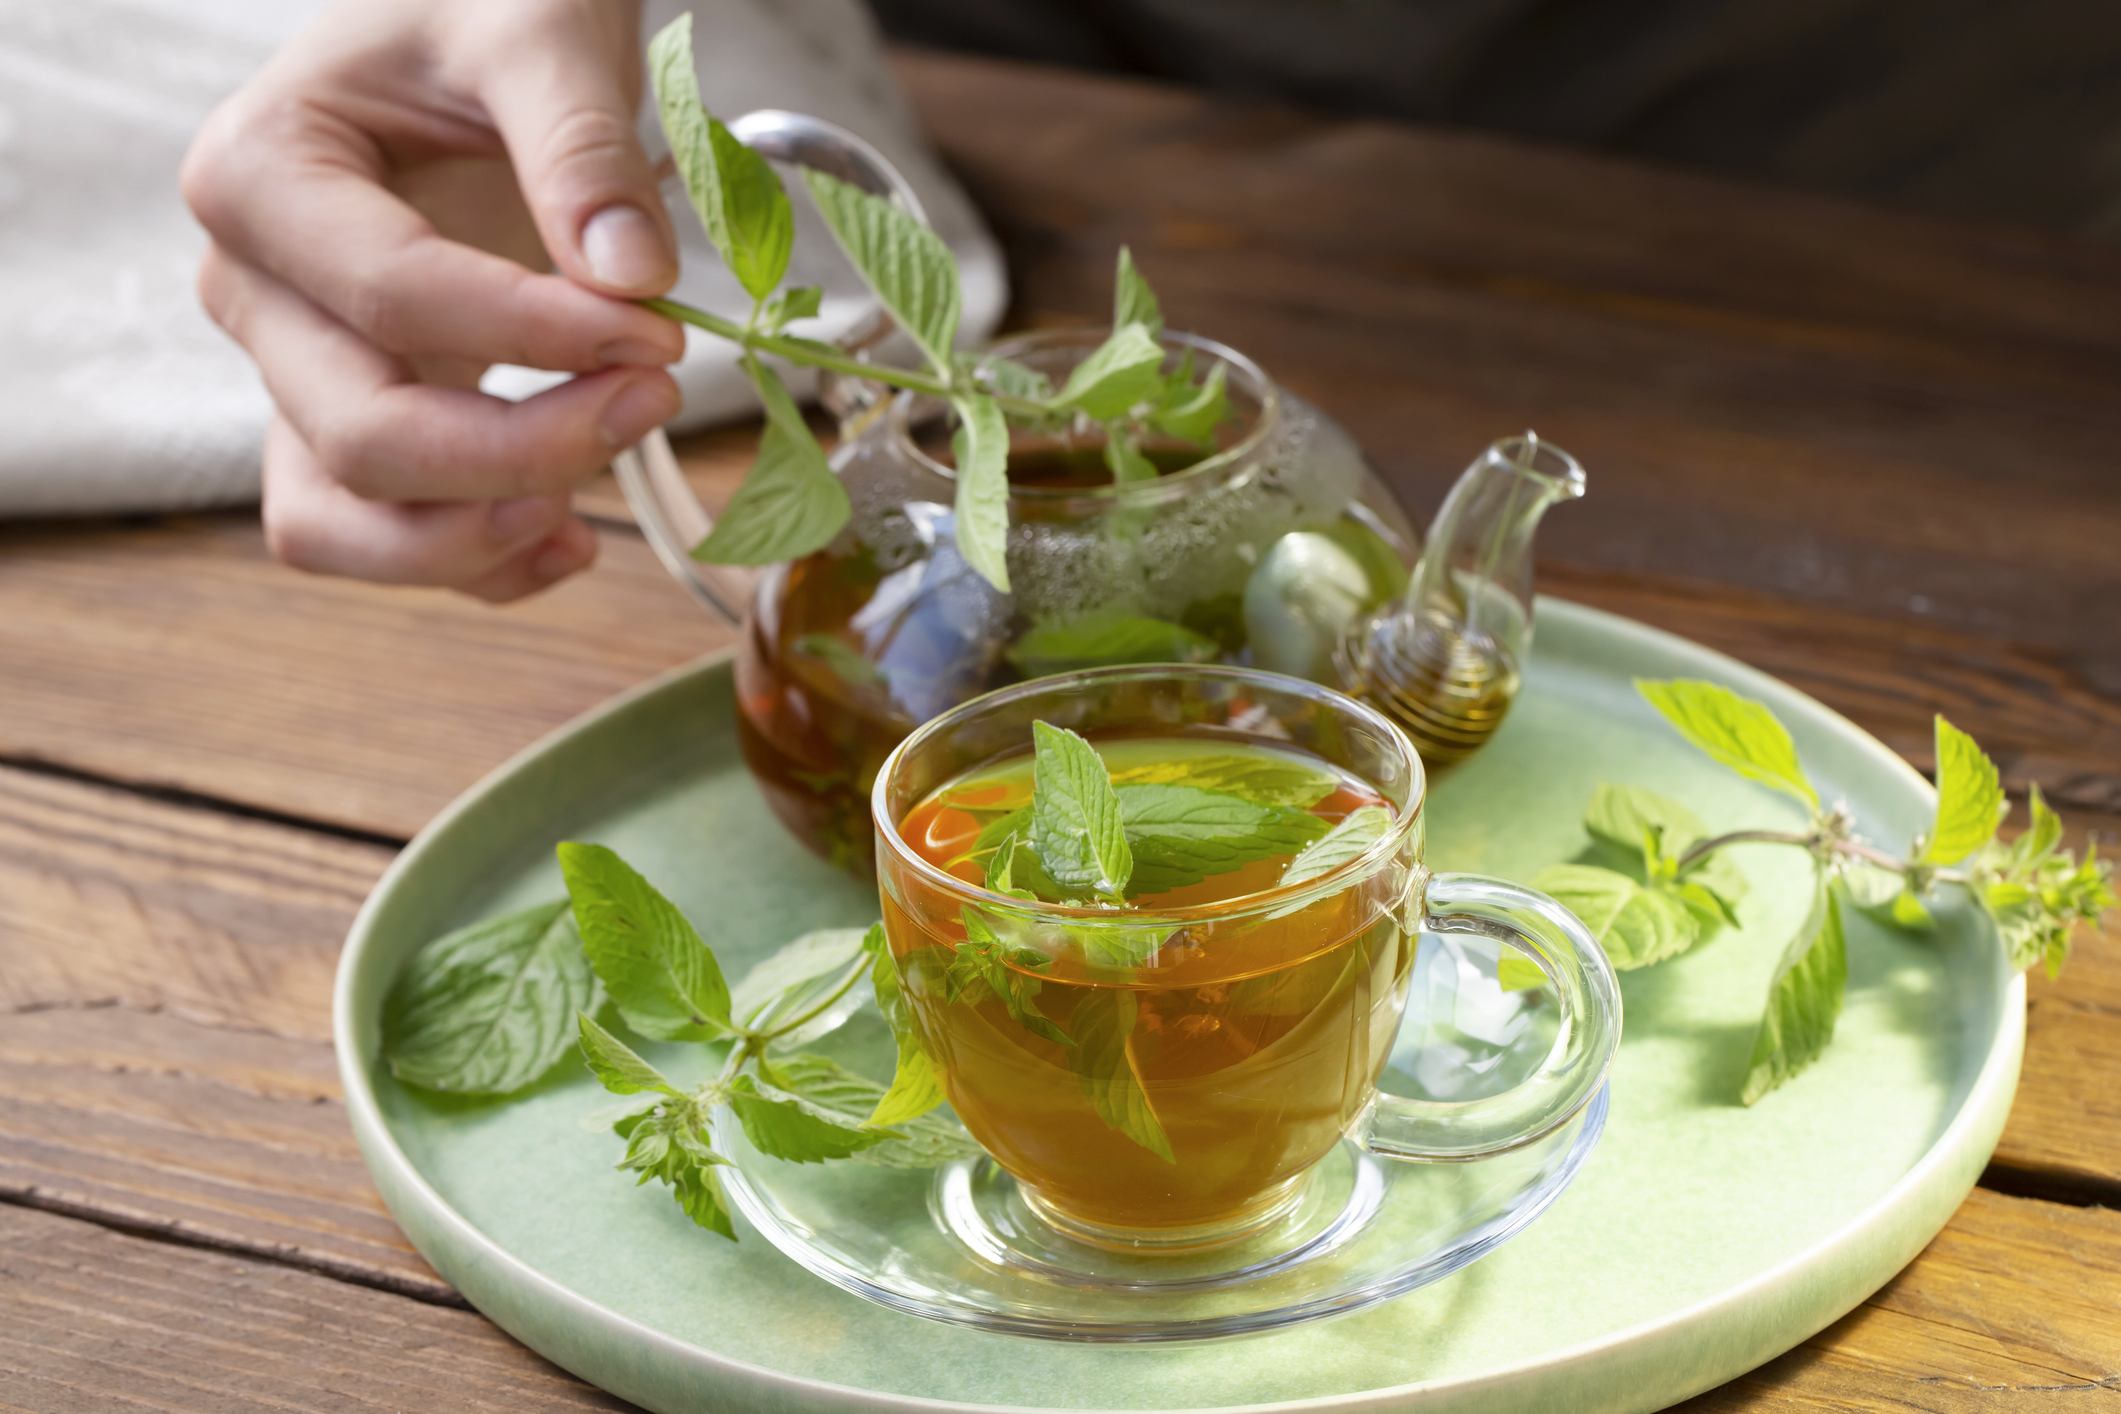 Does Spearmint Tea Help With PCOS?